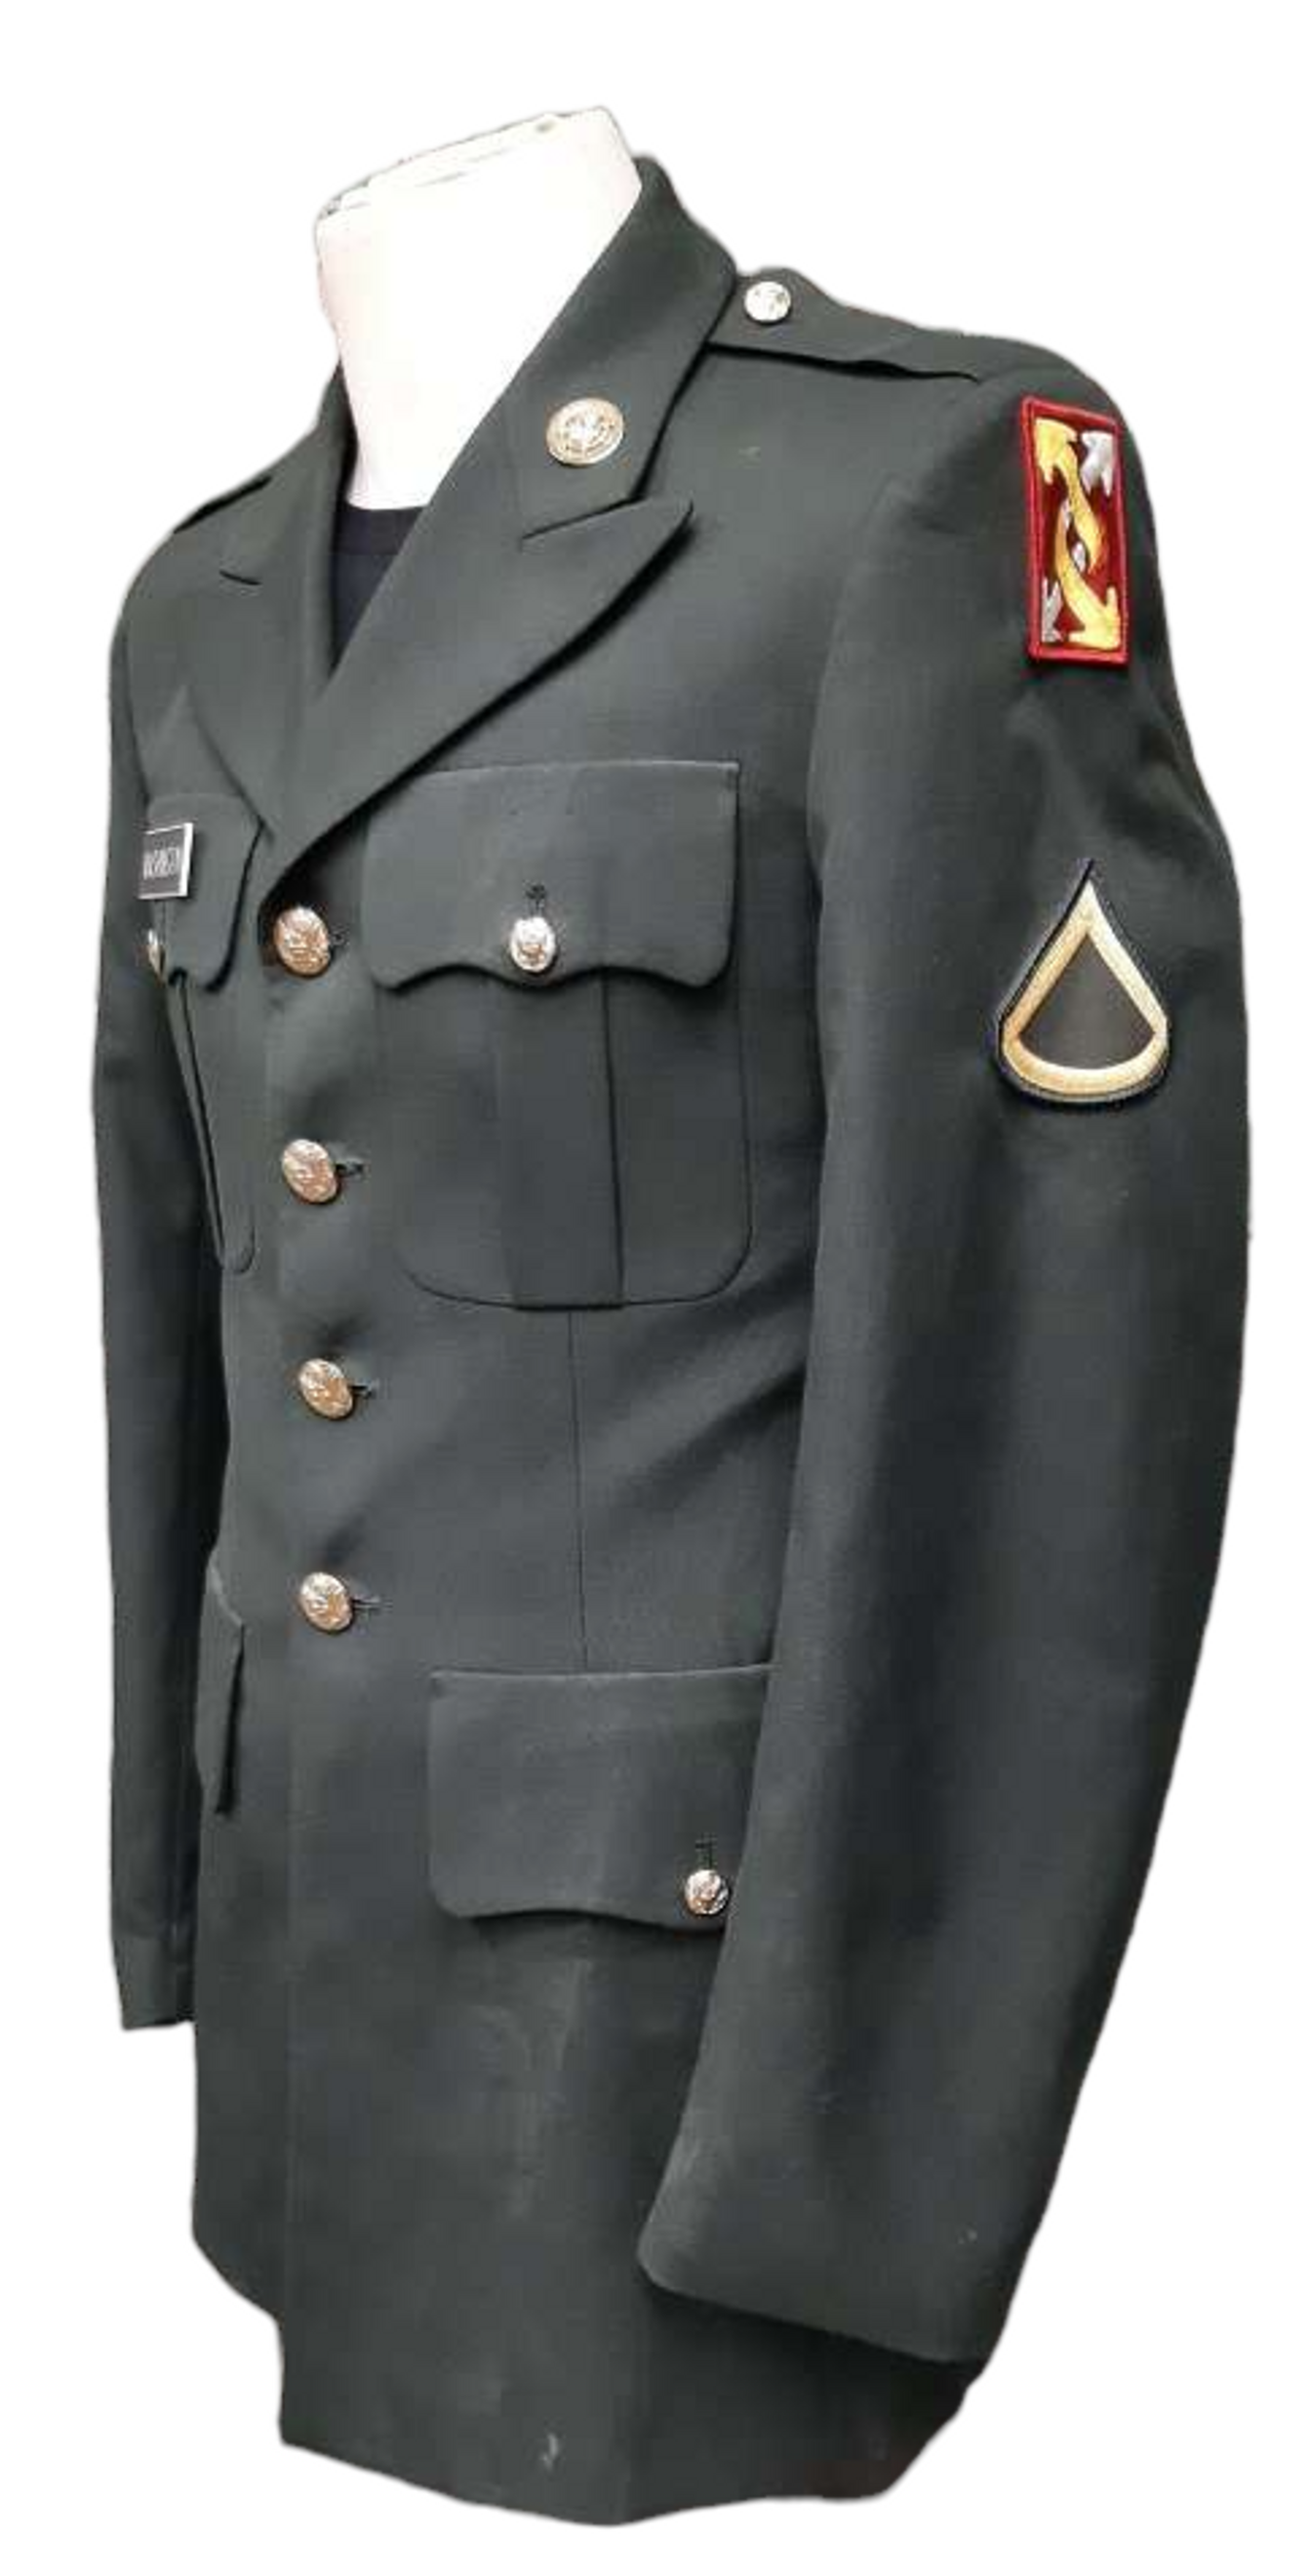 US Armed Forces Dress Green Jacket - 37 Long